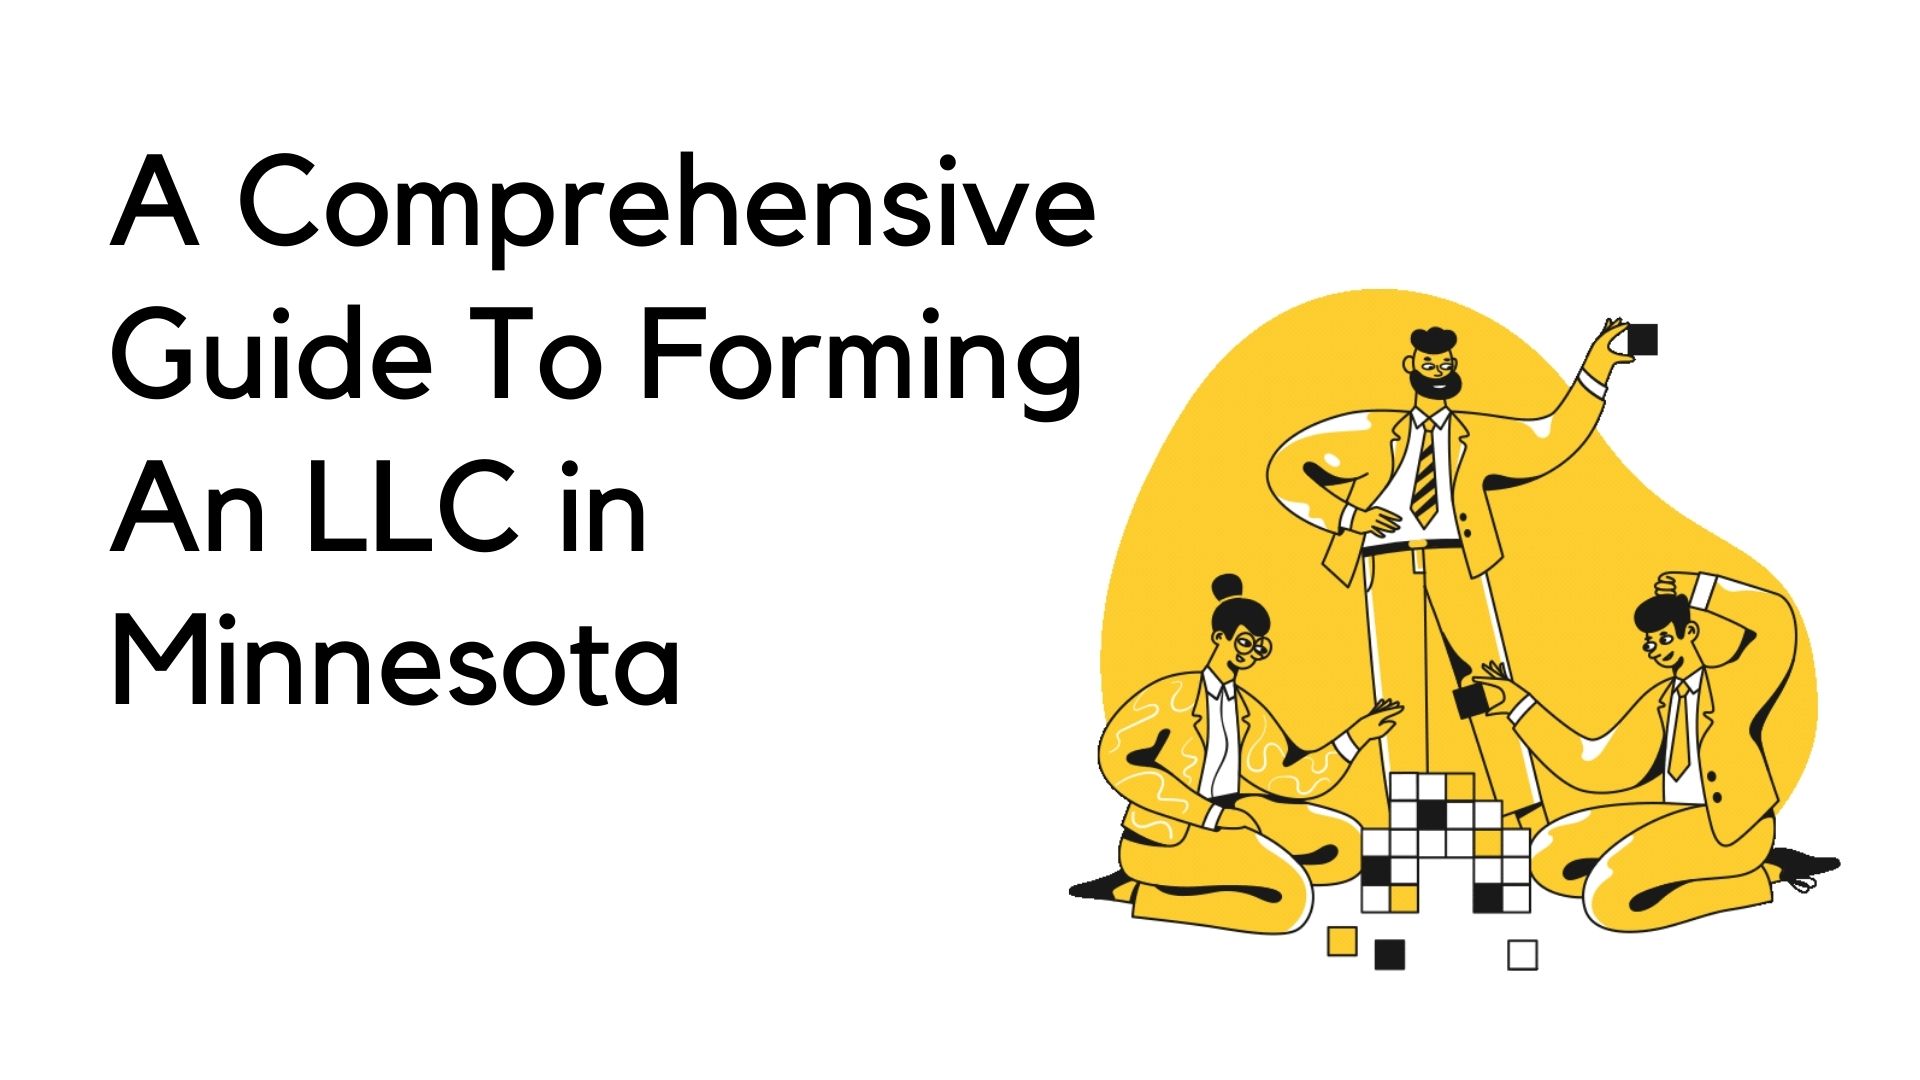 A Comprehensive Guide To Forming An LLC In Minnesota